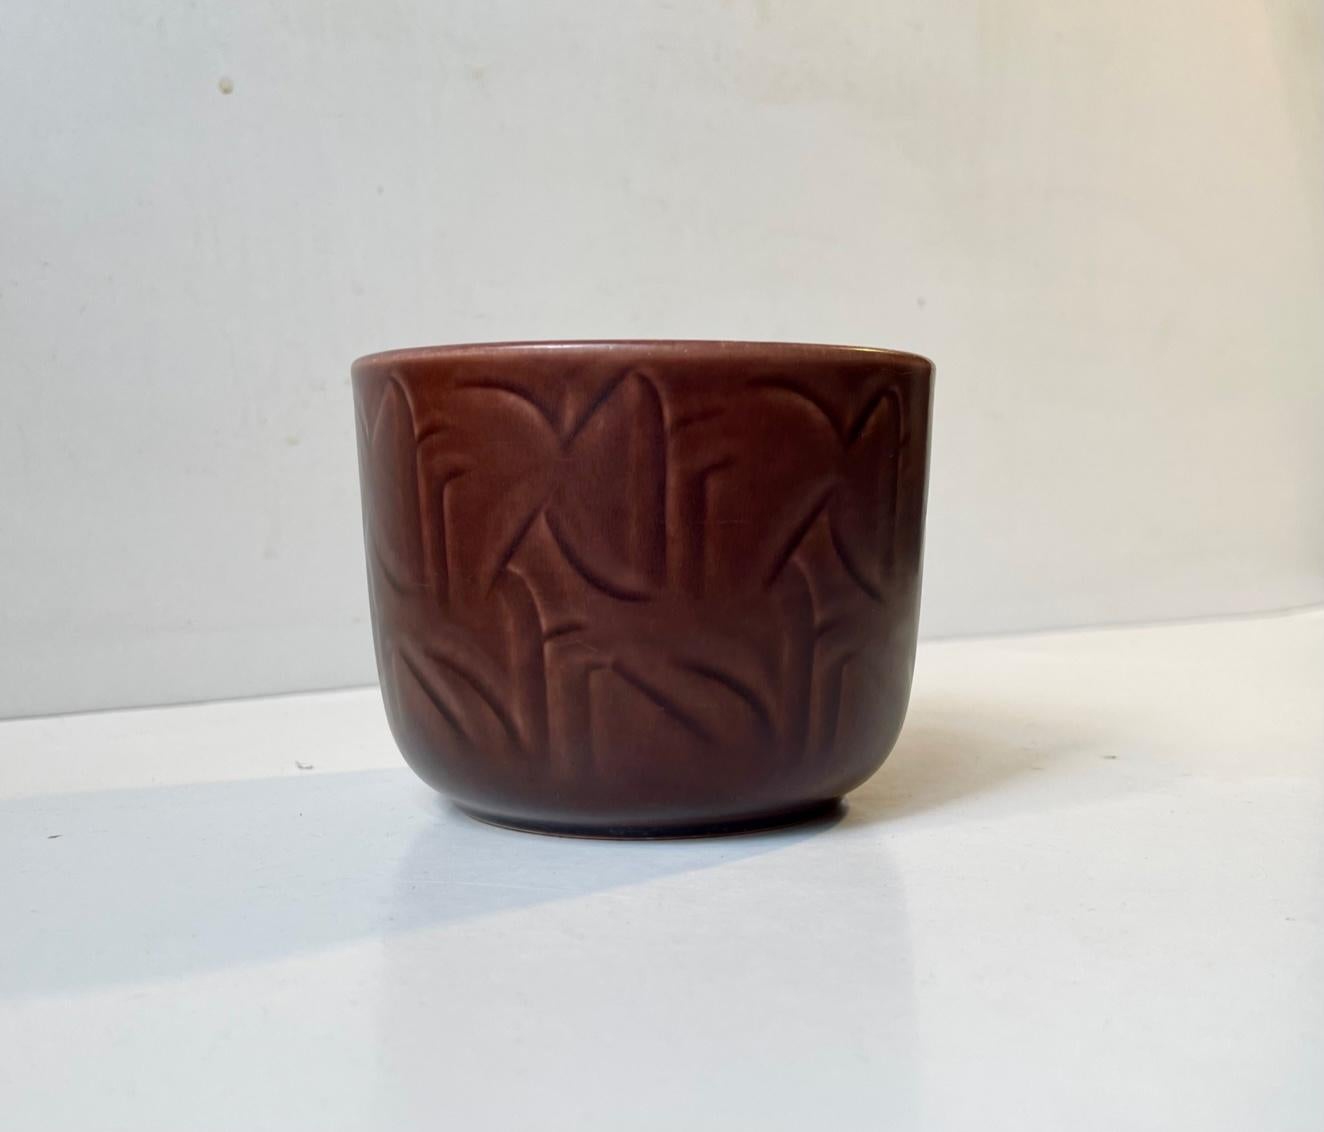 Small ceramic Vase/planter designed by Nils Thorsson and manufactured by Aluminia in Denmark during the 1950s. It is executed in a fated maroon/burgundy toned glaze with underlying abstract motifs. Model number 683 - very rare. Close related to the